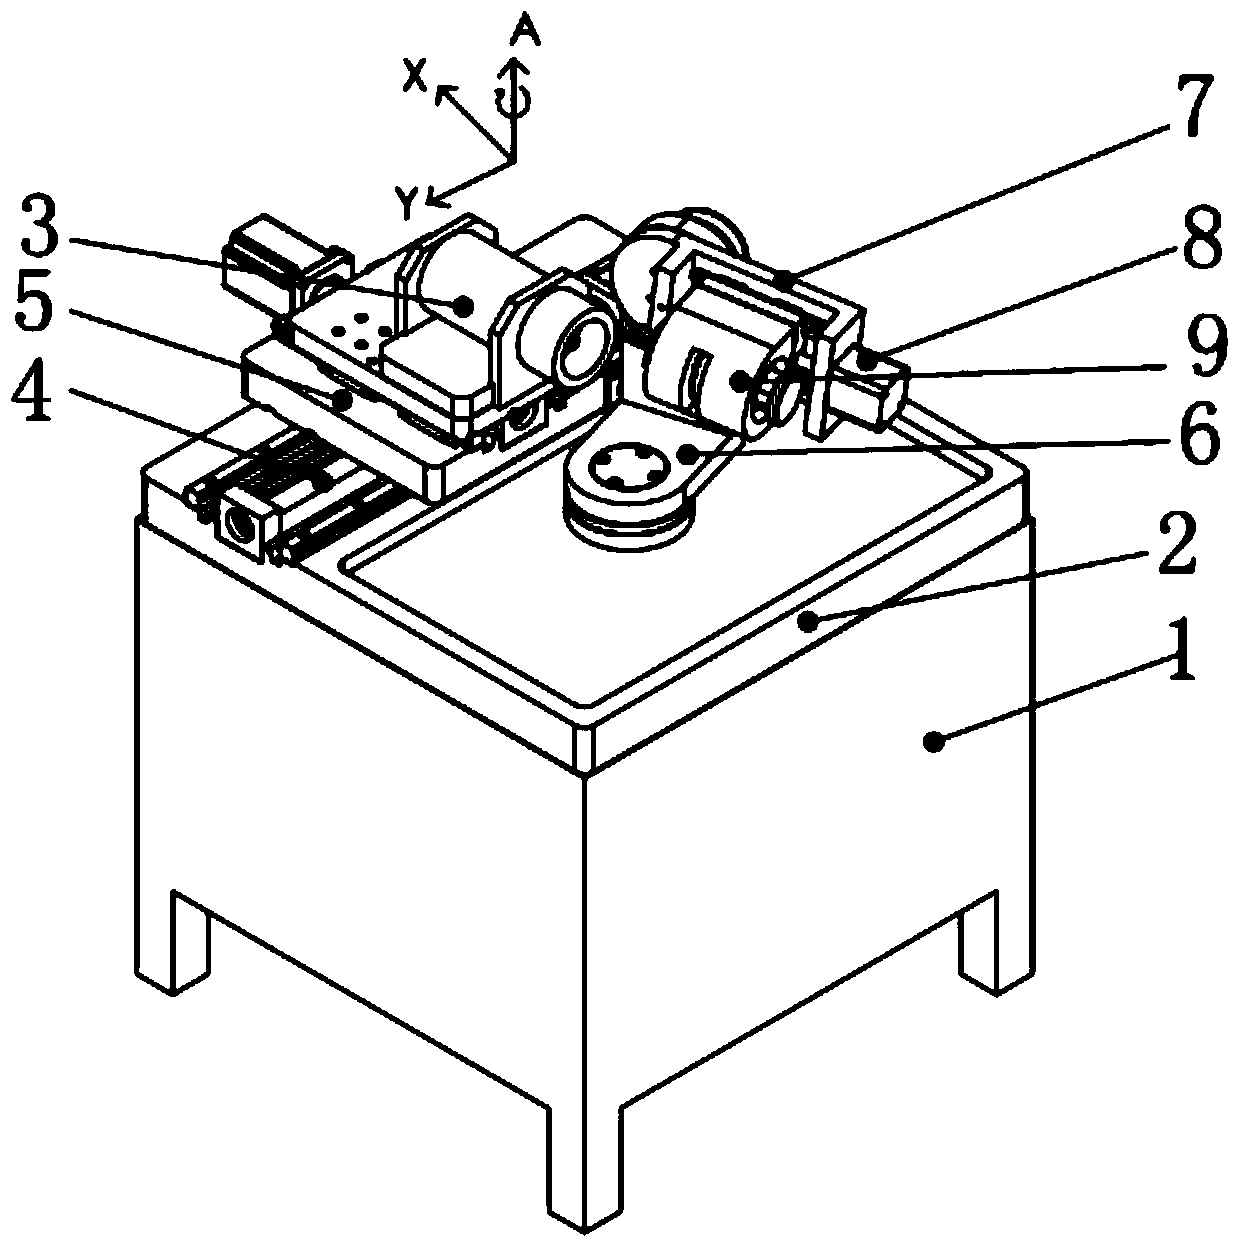 Small-sized six-axis linkage knife grinding device